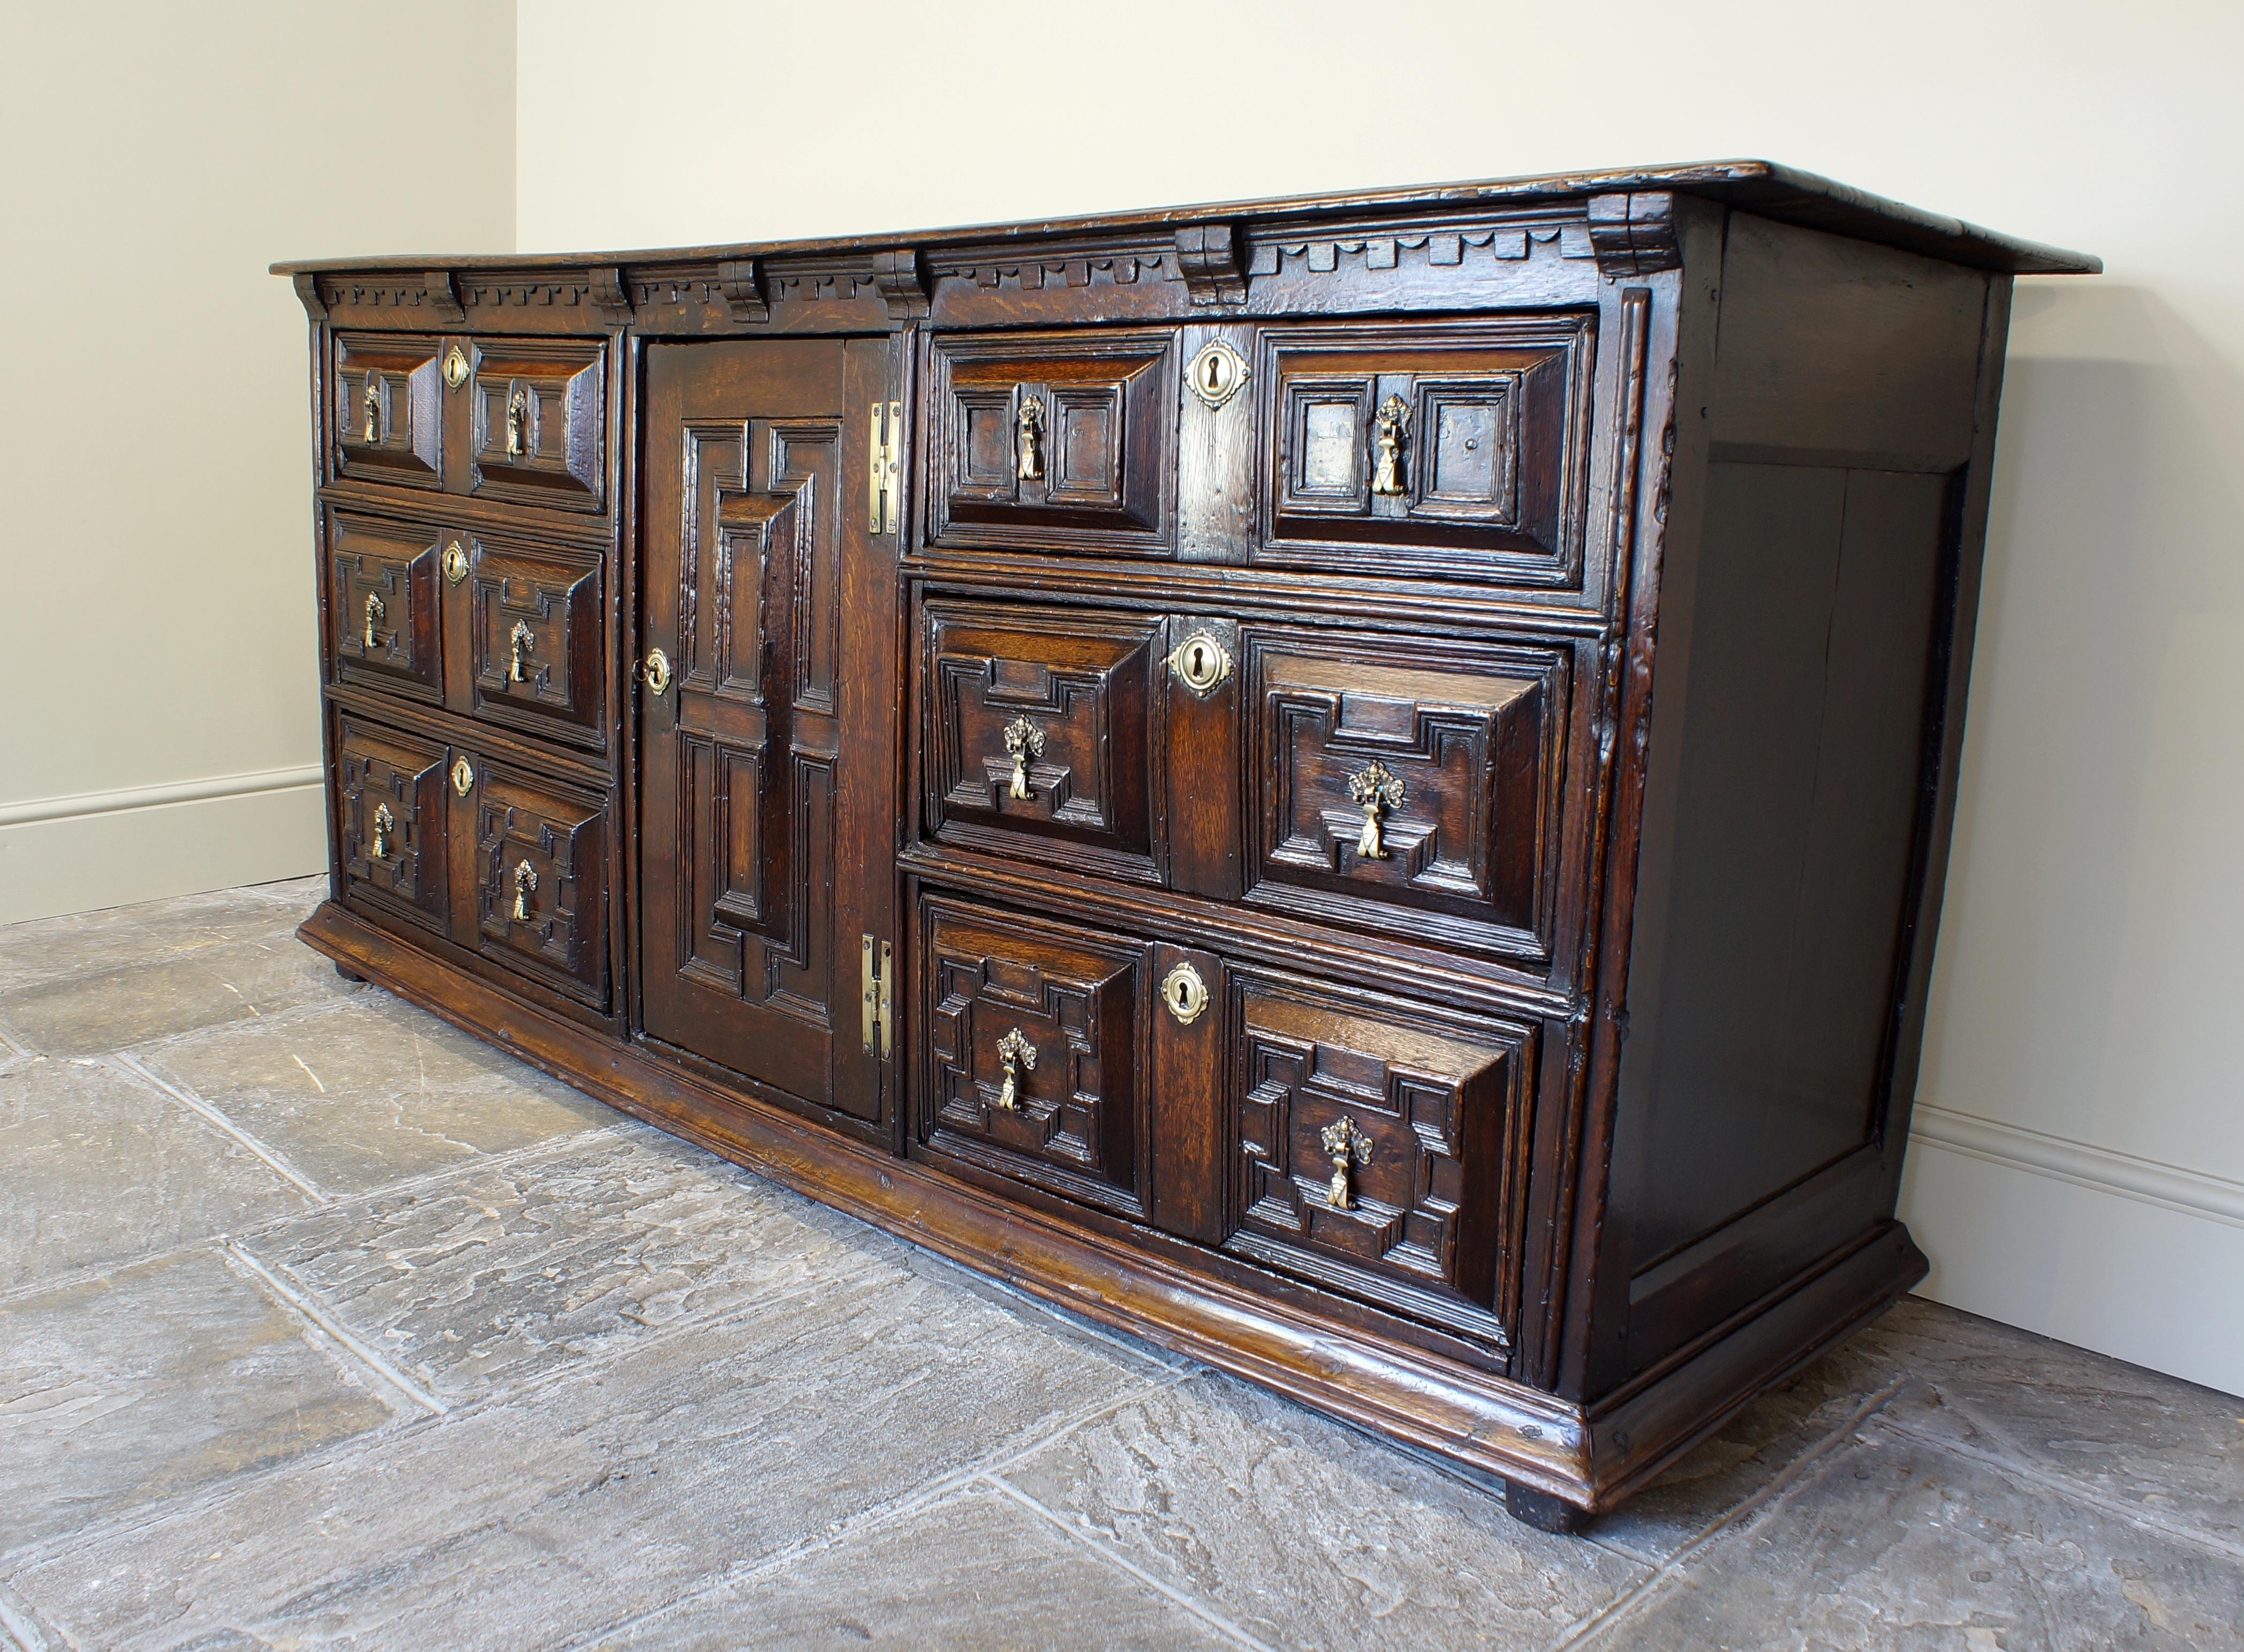 A superb 17th century oak serving dresser
having a tremendous presence. The two planked top above a central cupboard door, flanking the cupboard are two banks of cushion and geometrically moulded drawers. The bottom of the dresser is finished by a